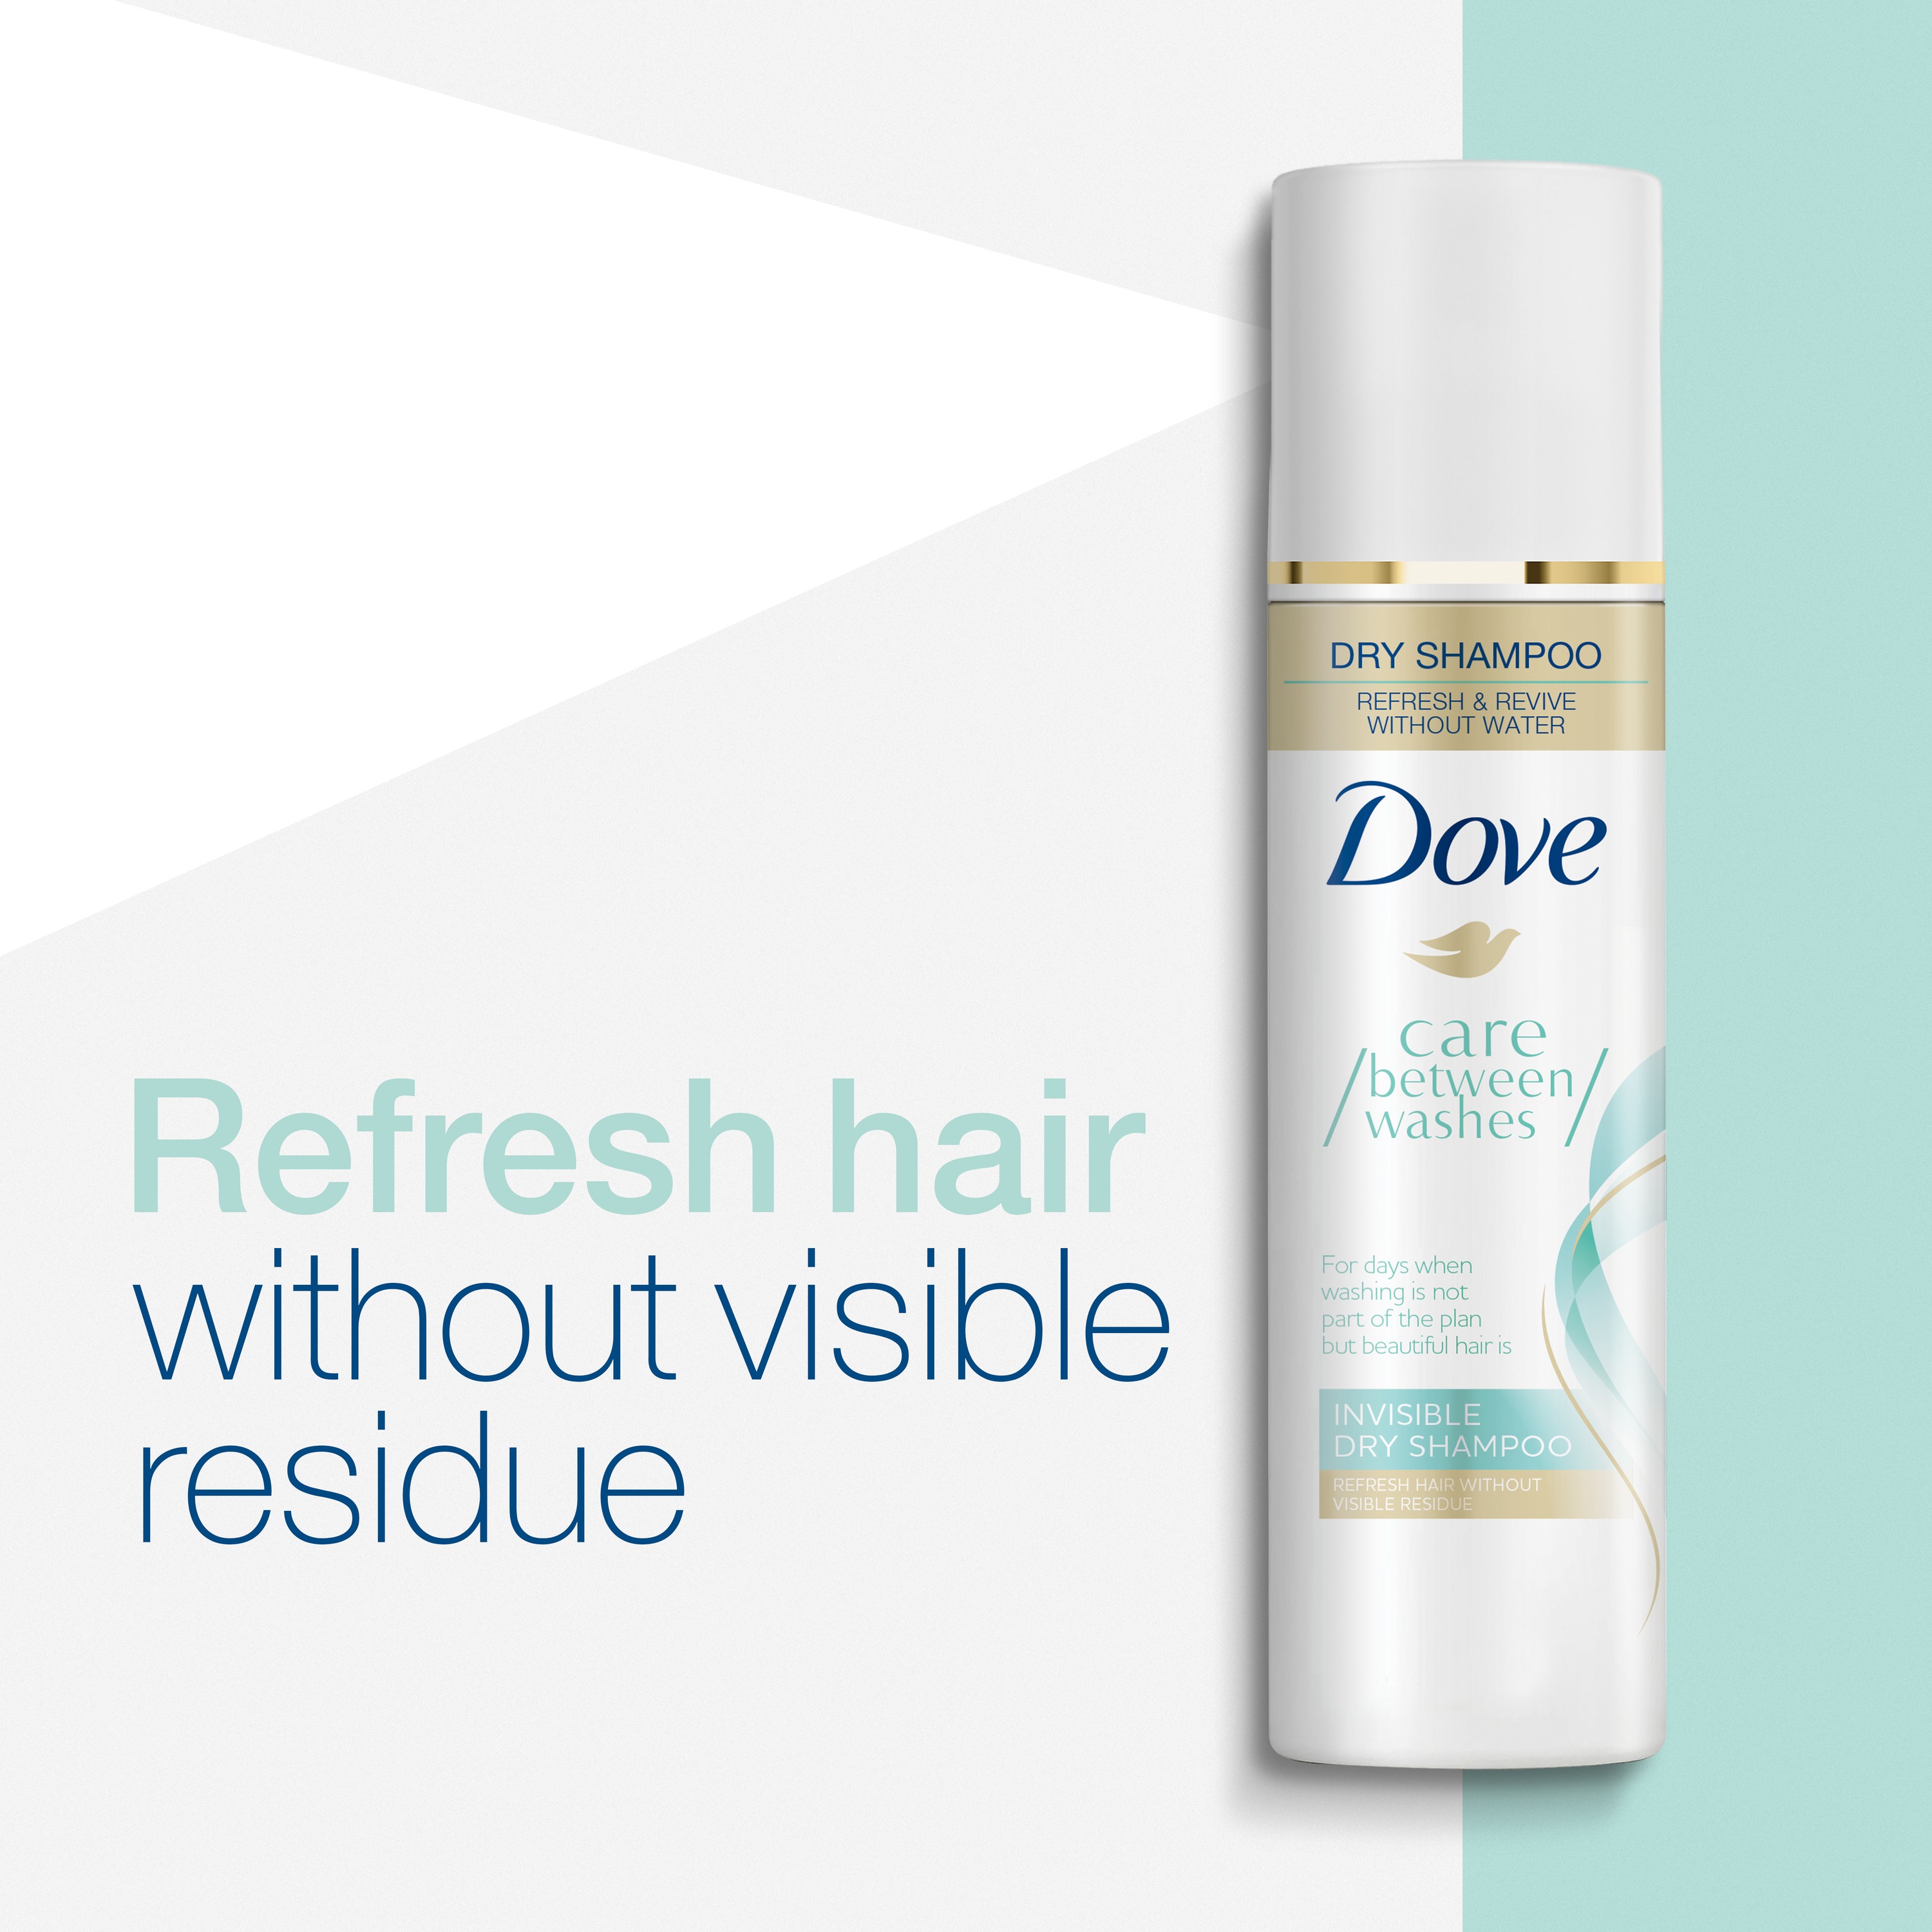 Dove Care Between Washes Dry Shampoo Invisible, 5 oz - image 4 of 10